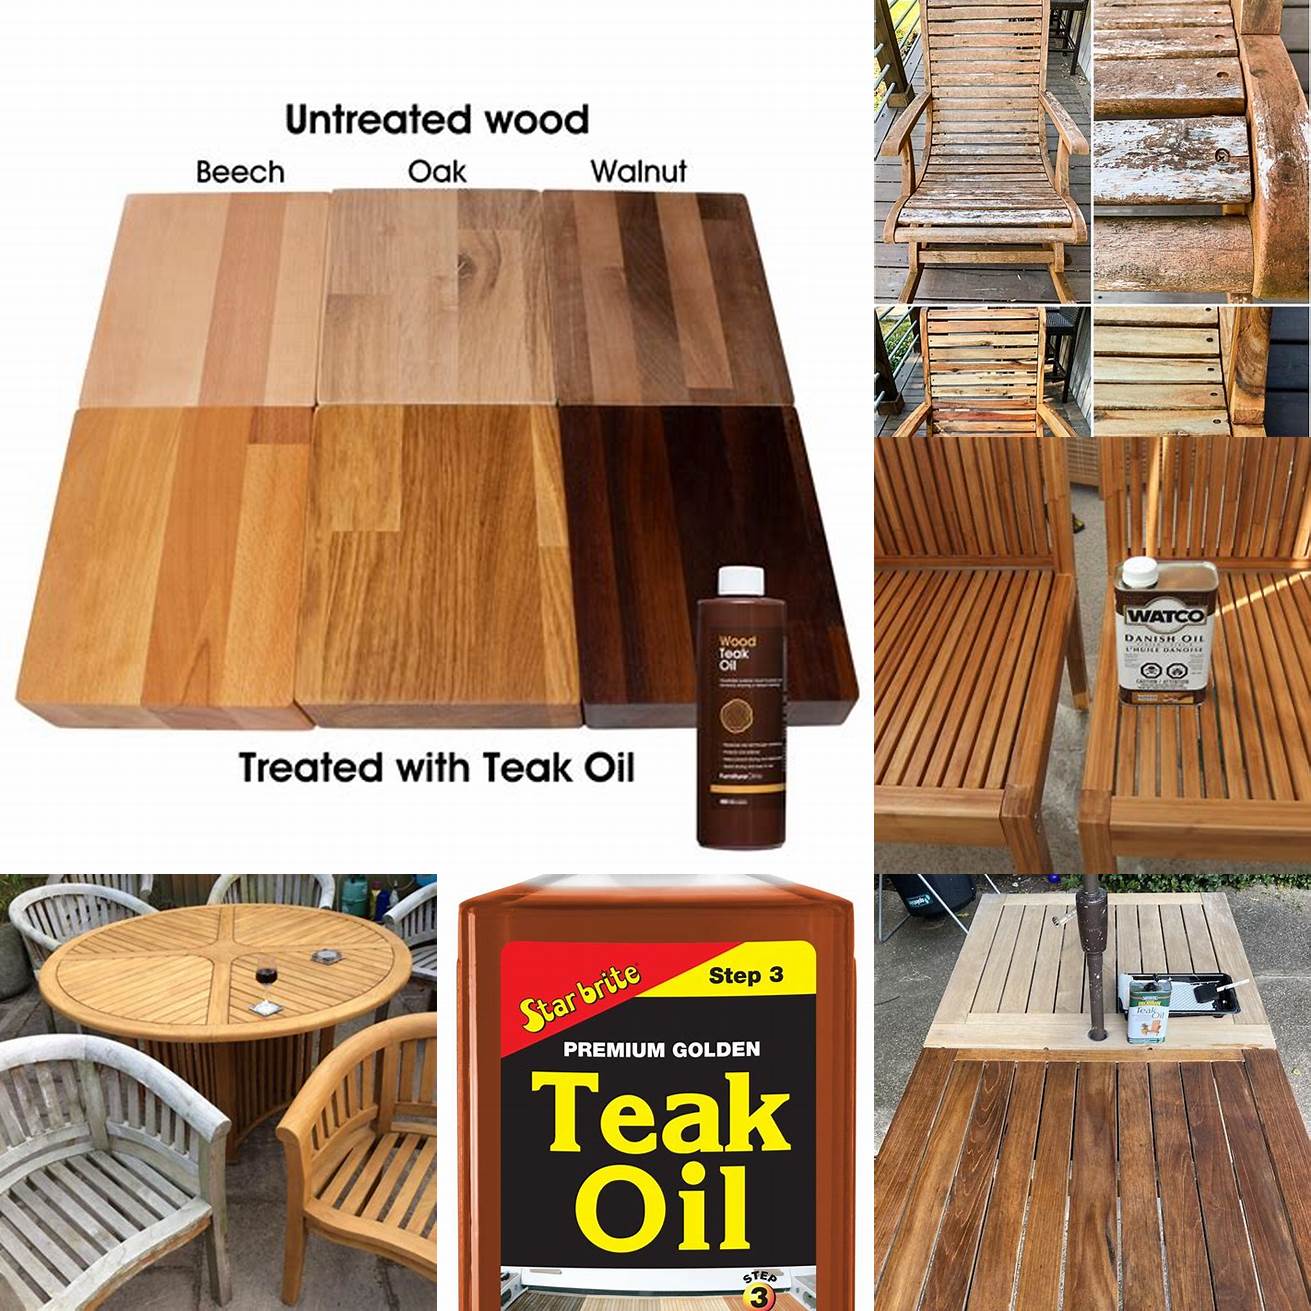 Photos of the different colors of teak oil